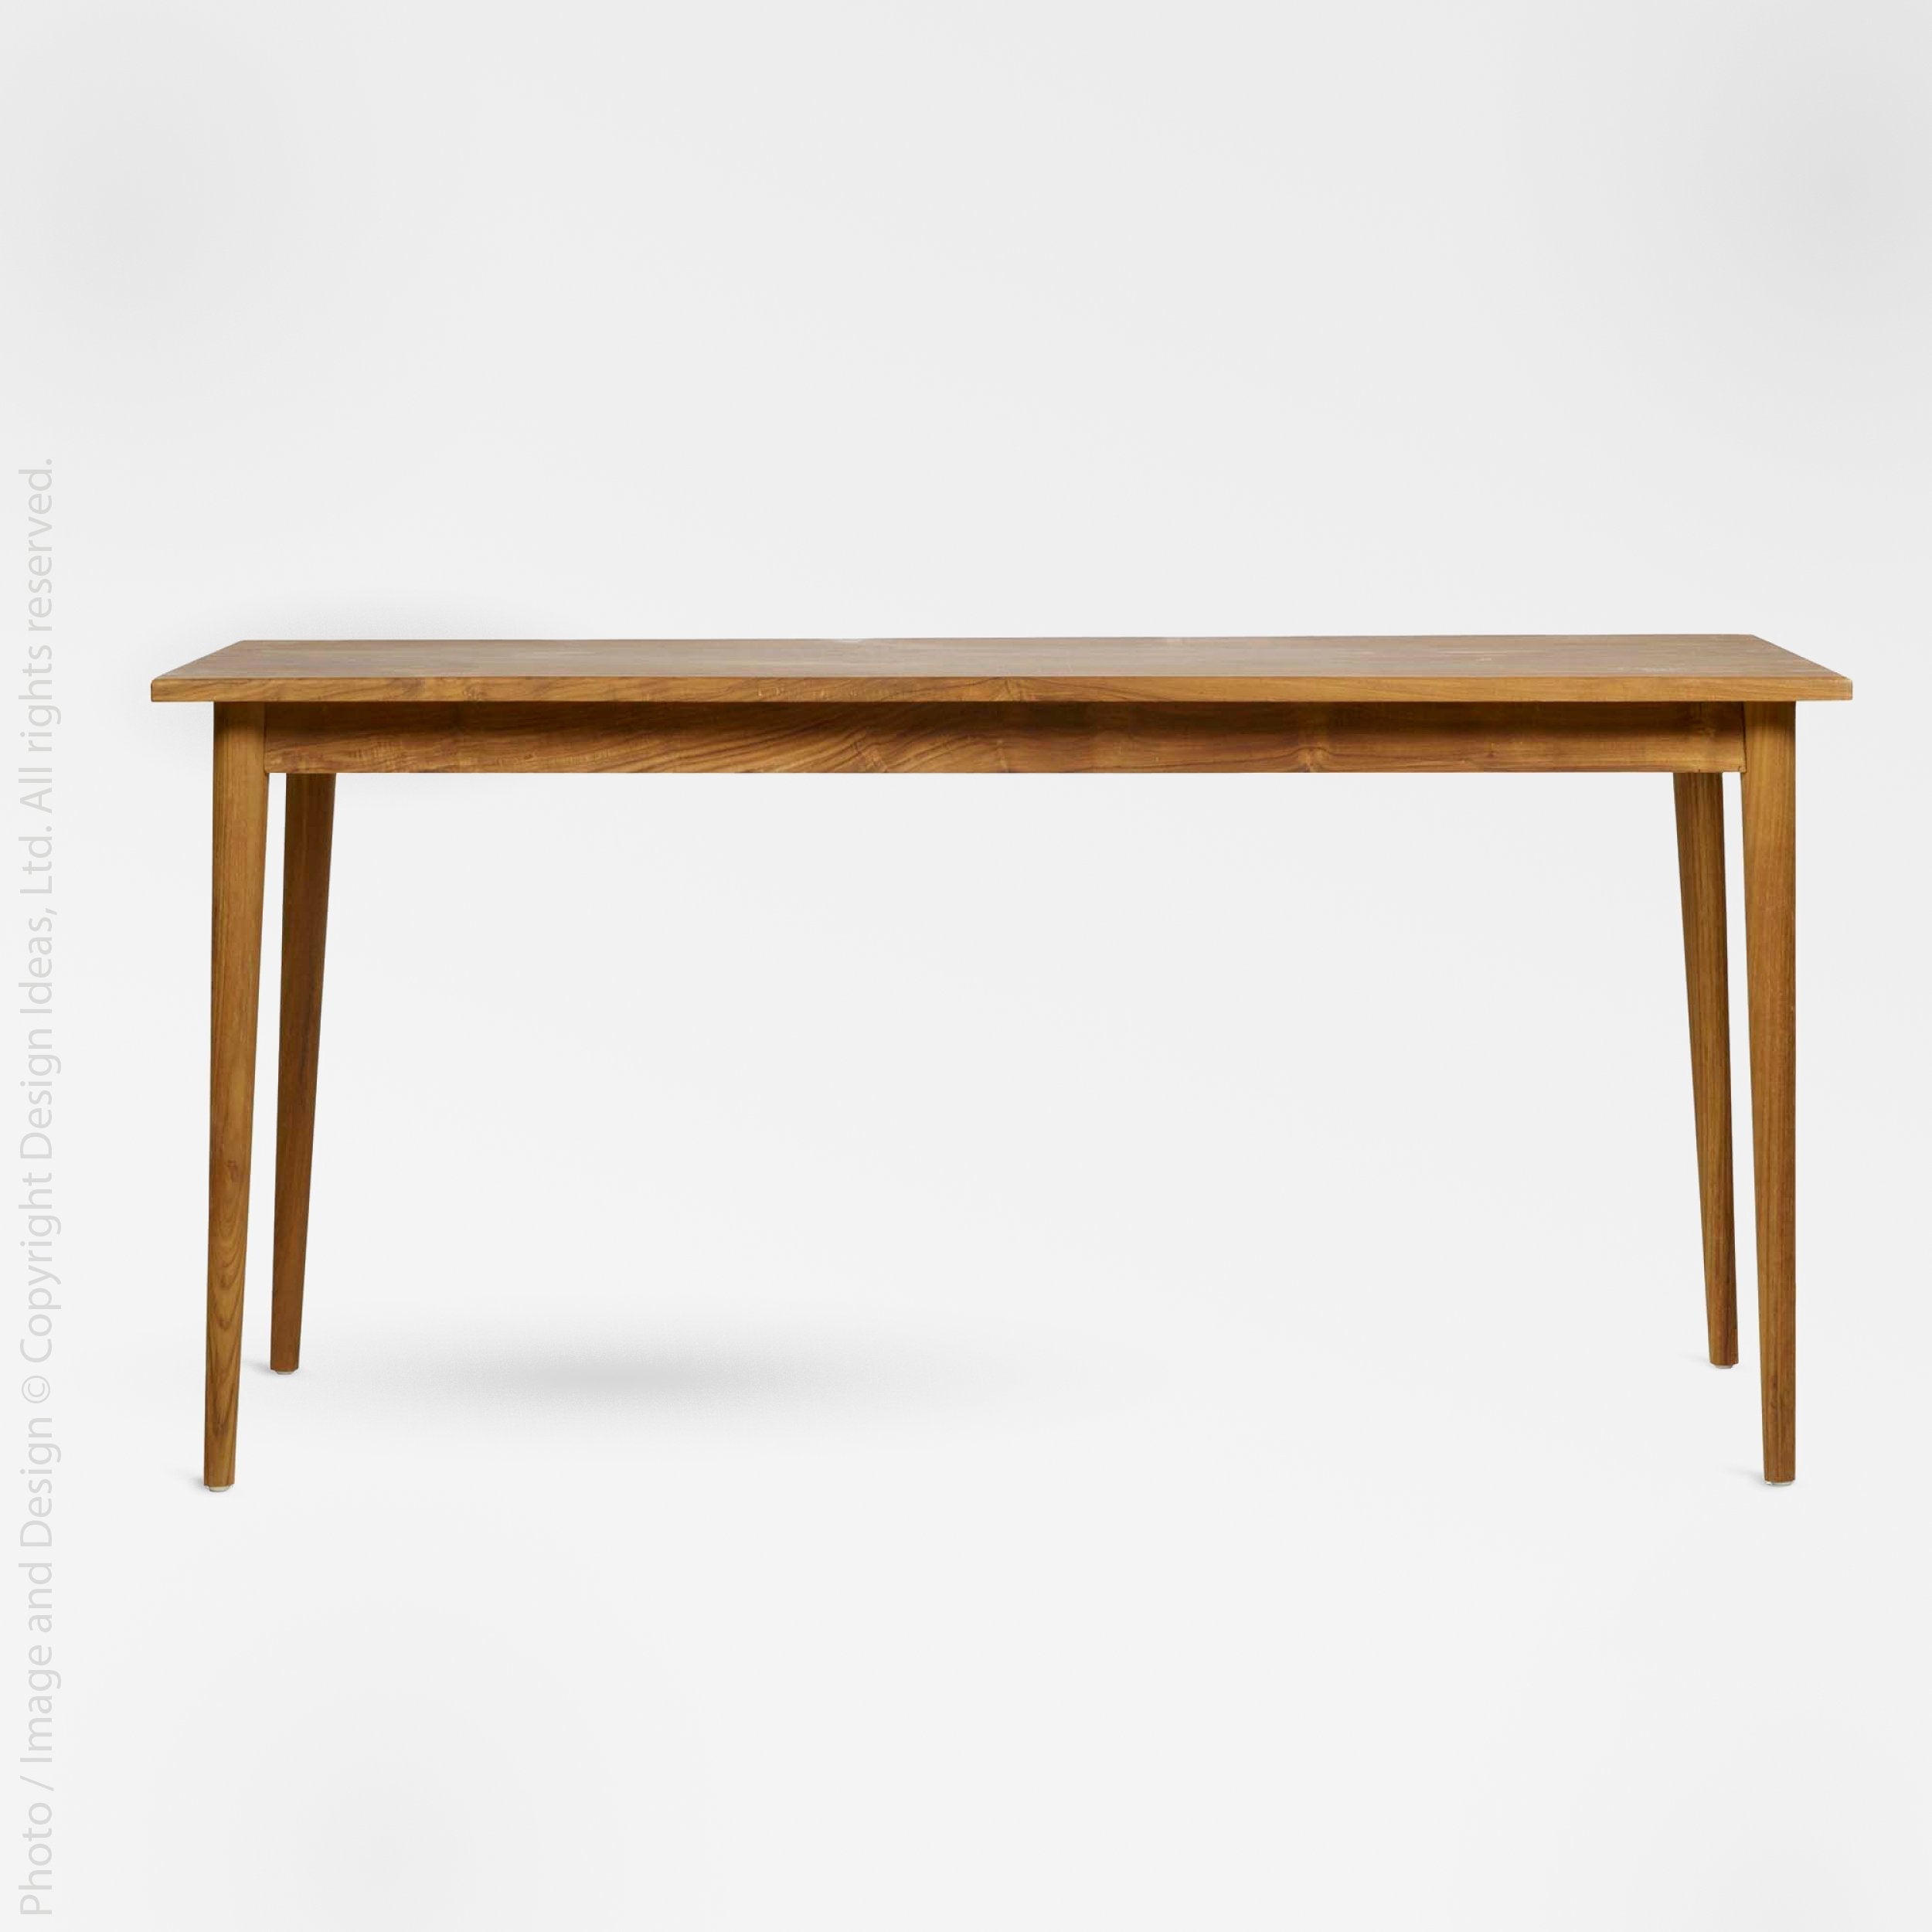 Oslo Teak Dining Table - Natural Color | Image 1 | From the Oslo Collection | Skillfully made with natural teak for long lasting use | This table is sustainably sourced | Available in natural color | texxture home